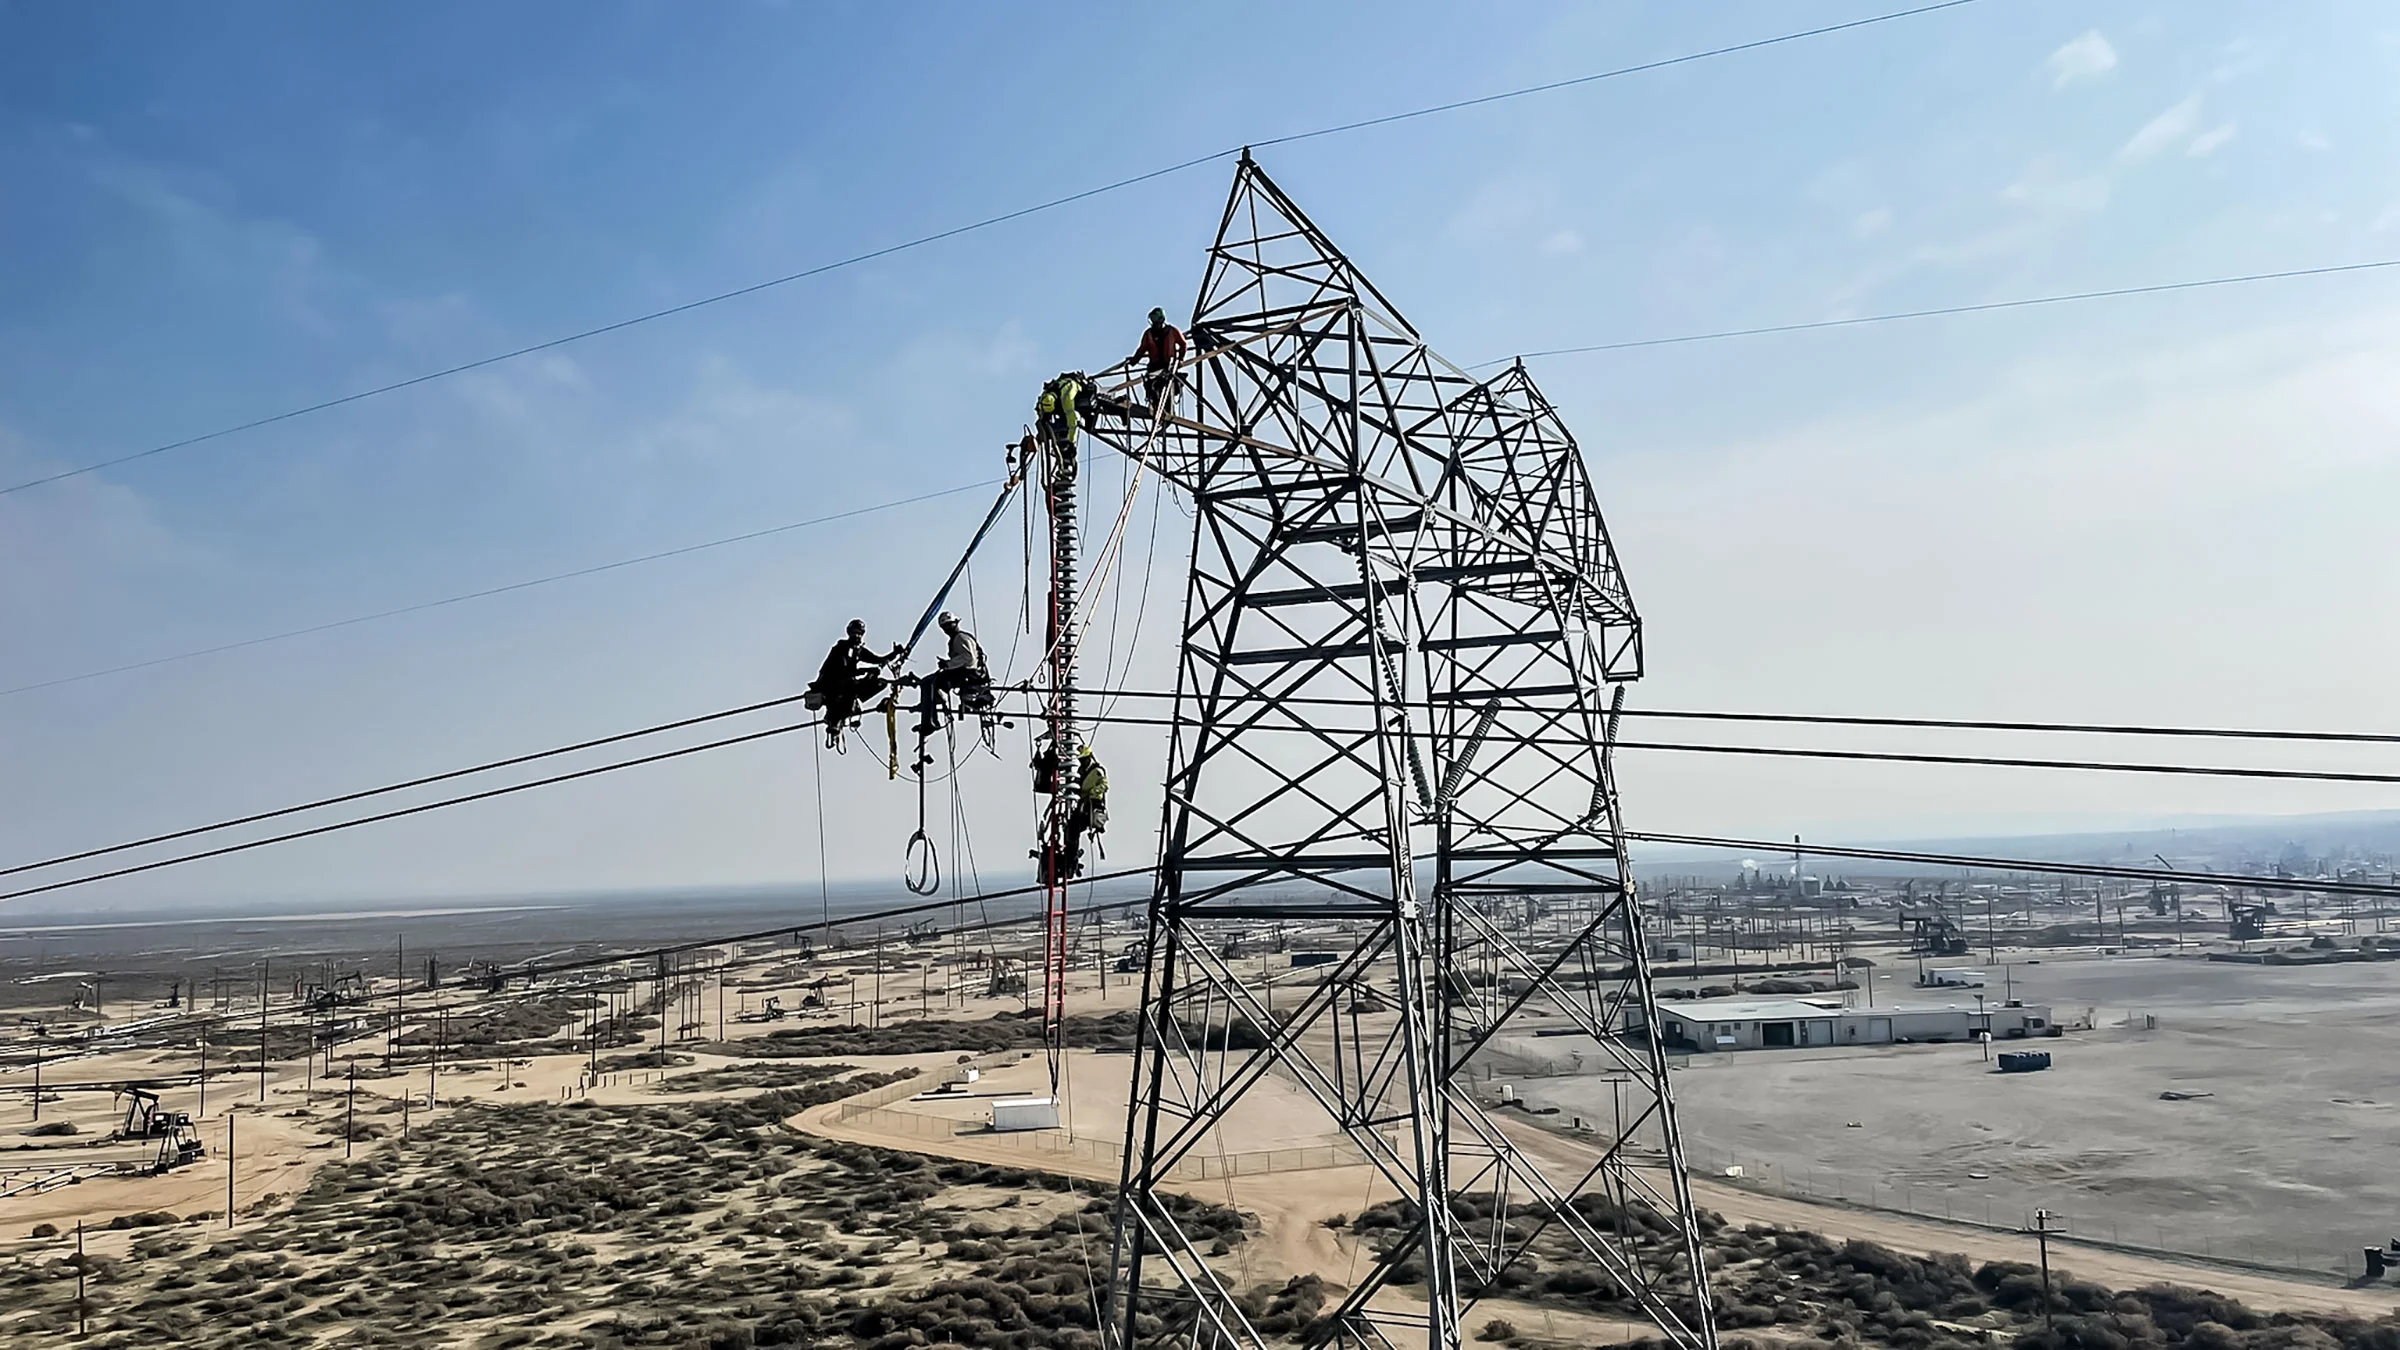 Diablo line workers working high in the air on transmission pole